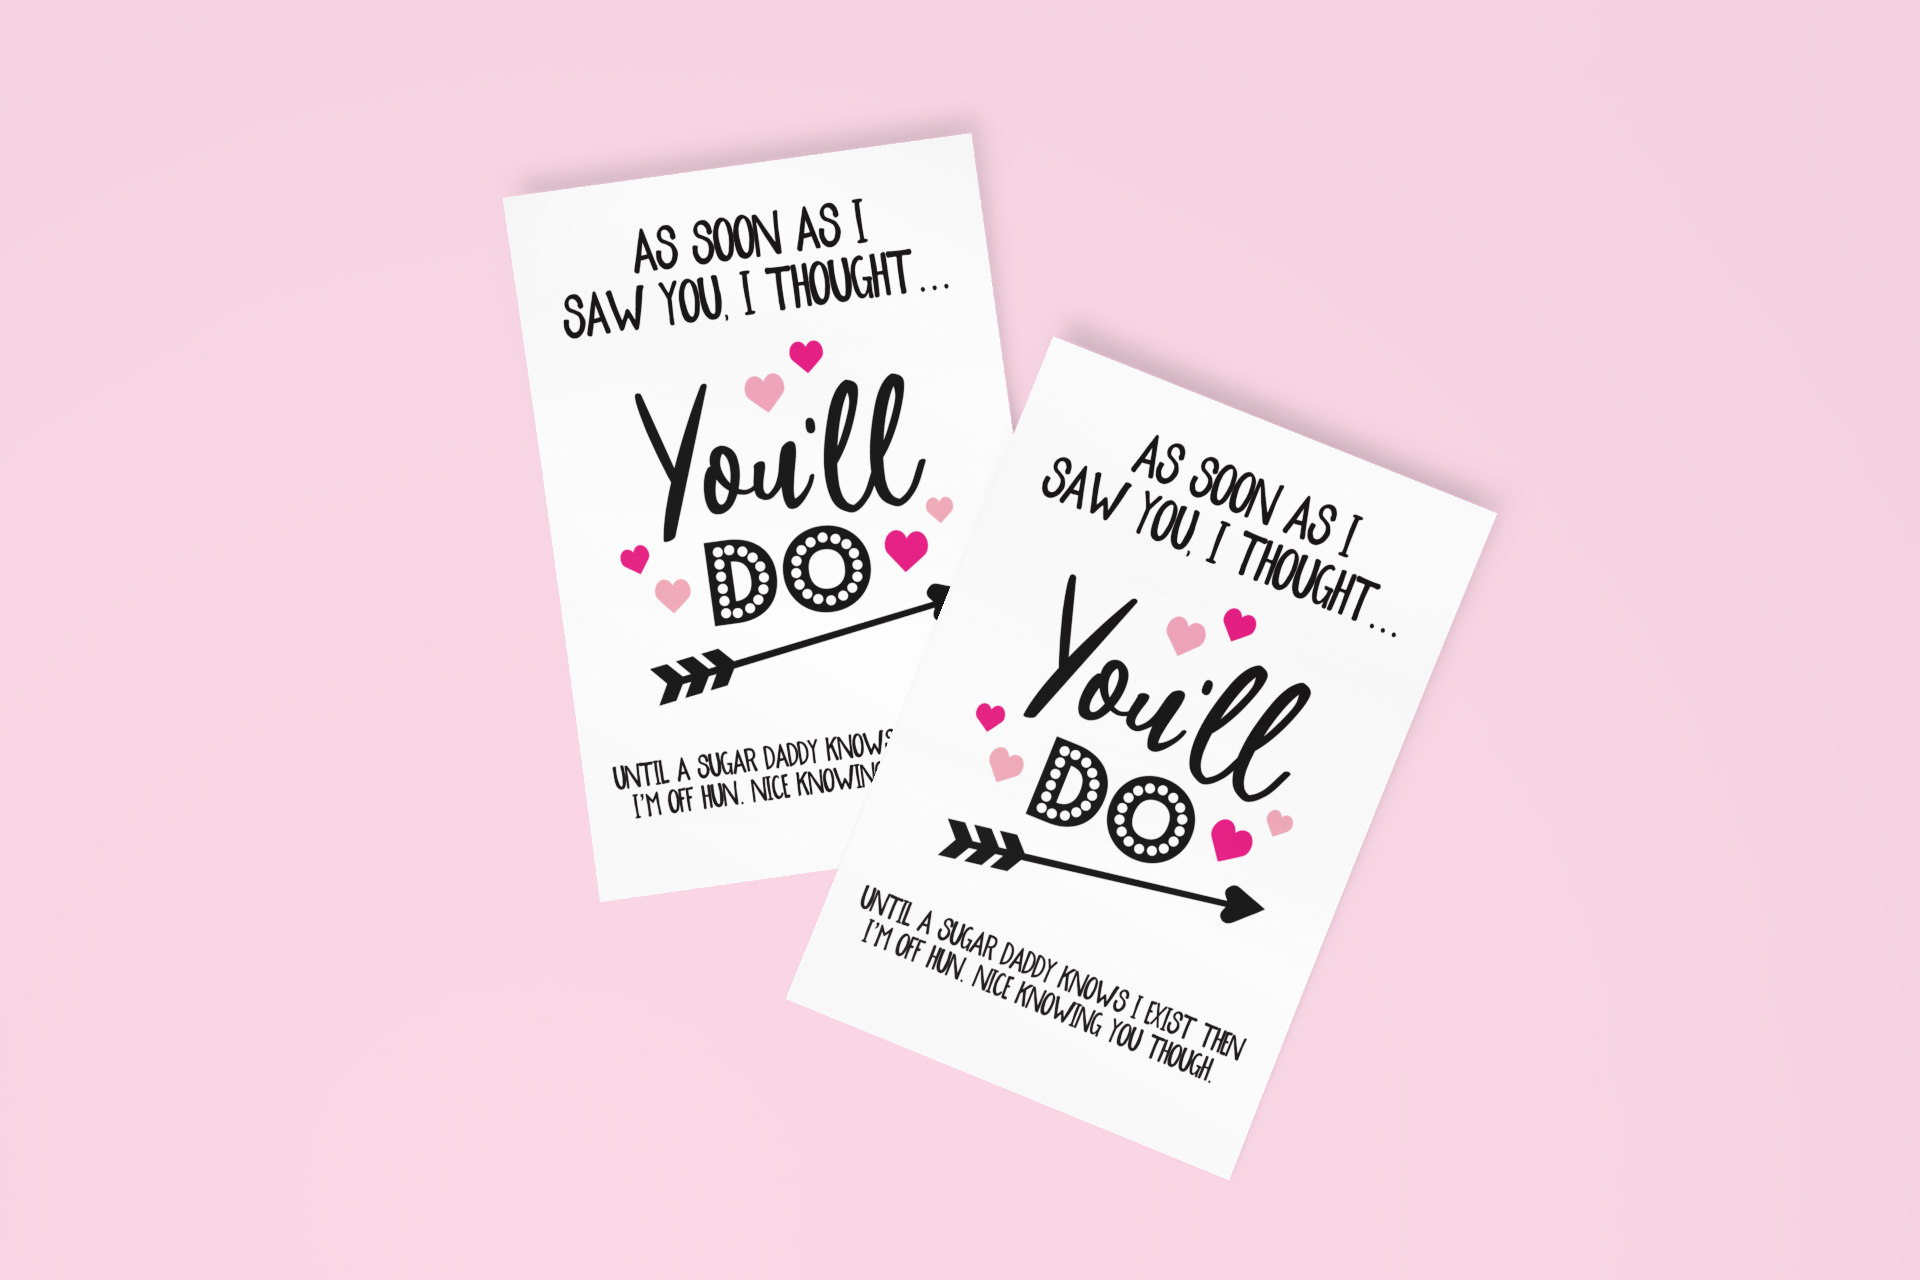 White vertical greetings card with the funny quote 'as soon as i saw you i thought, you'll do... Until a sugar daddy knows i exist then i'm off hun. It was knowing you though'. Printed in black ink with pink hearts surrounded it.